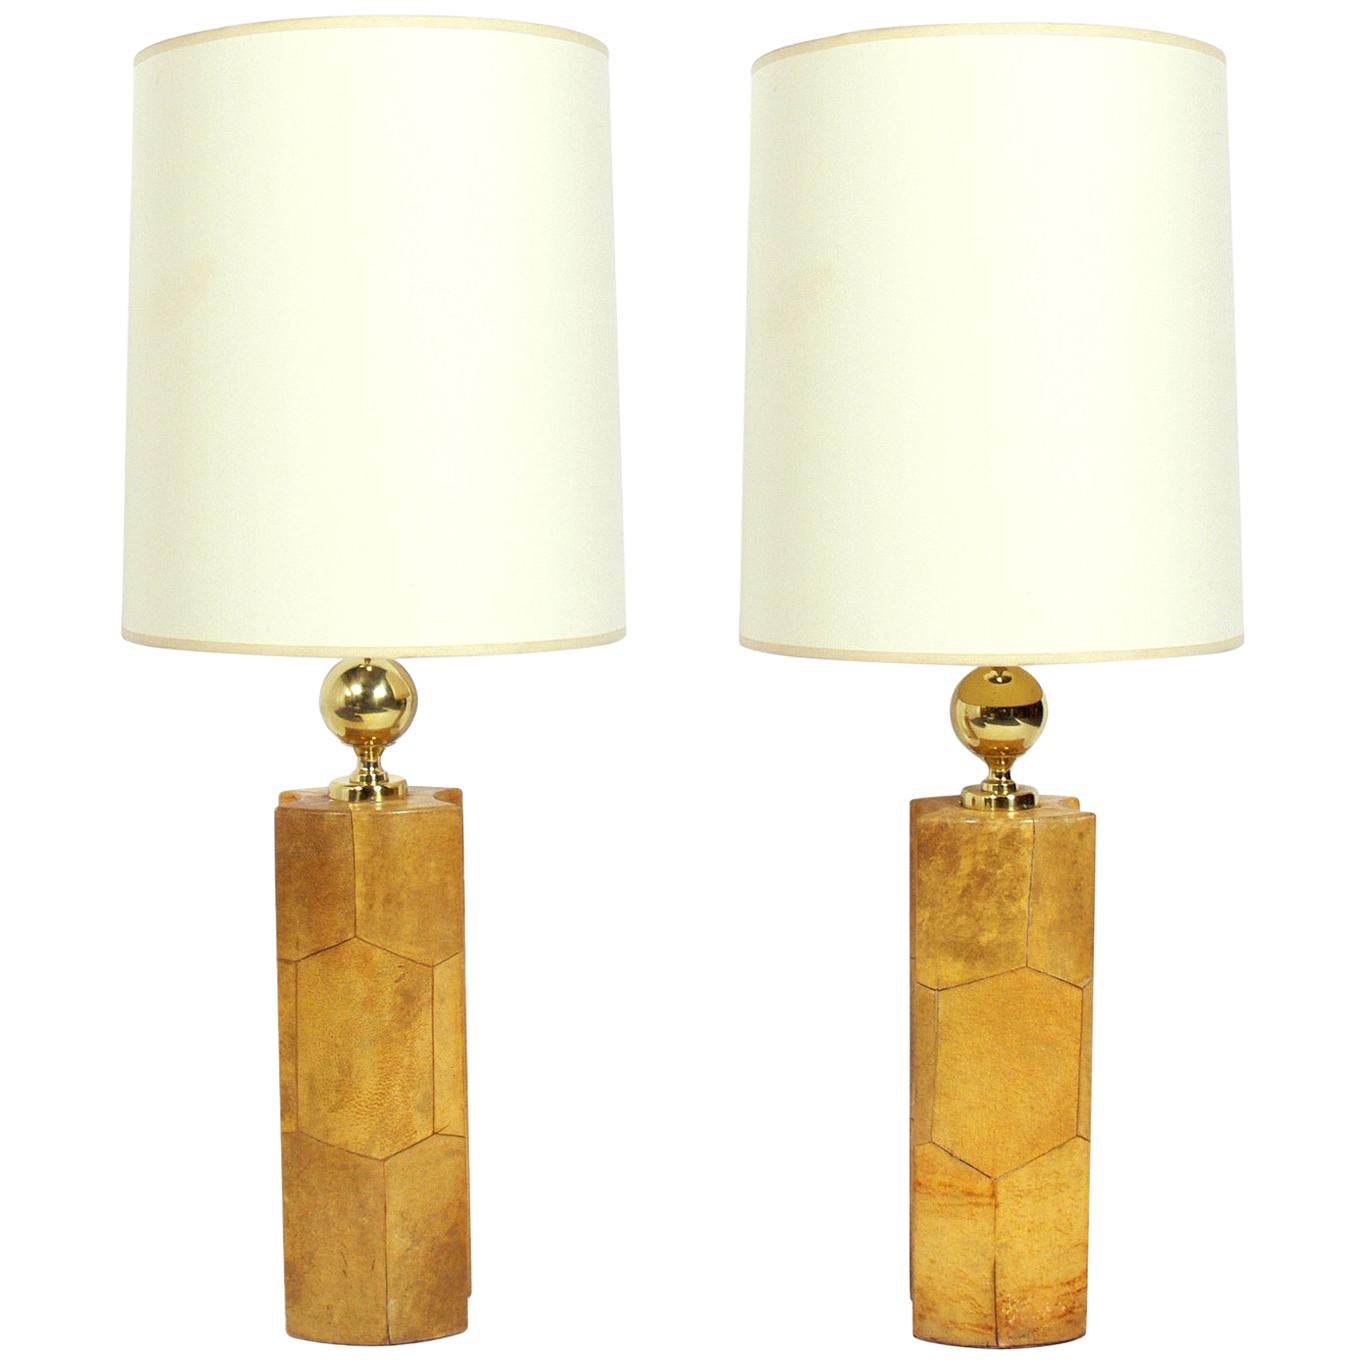 Pair of Chic Goatskin Lamps by Aldo Tura